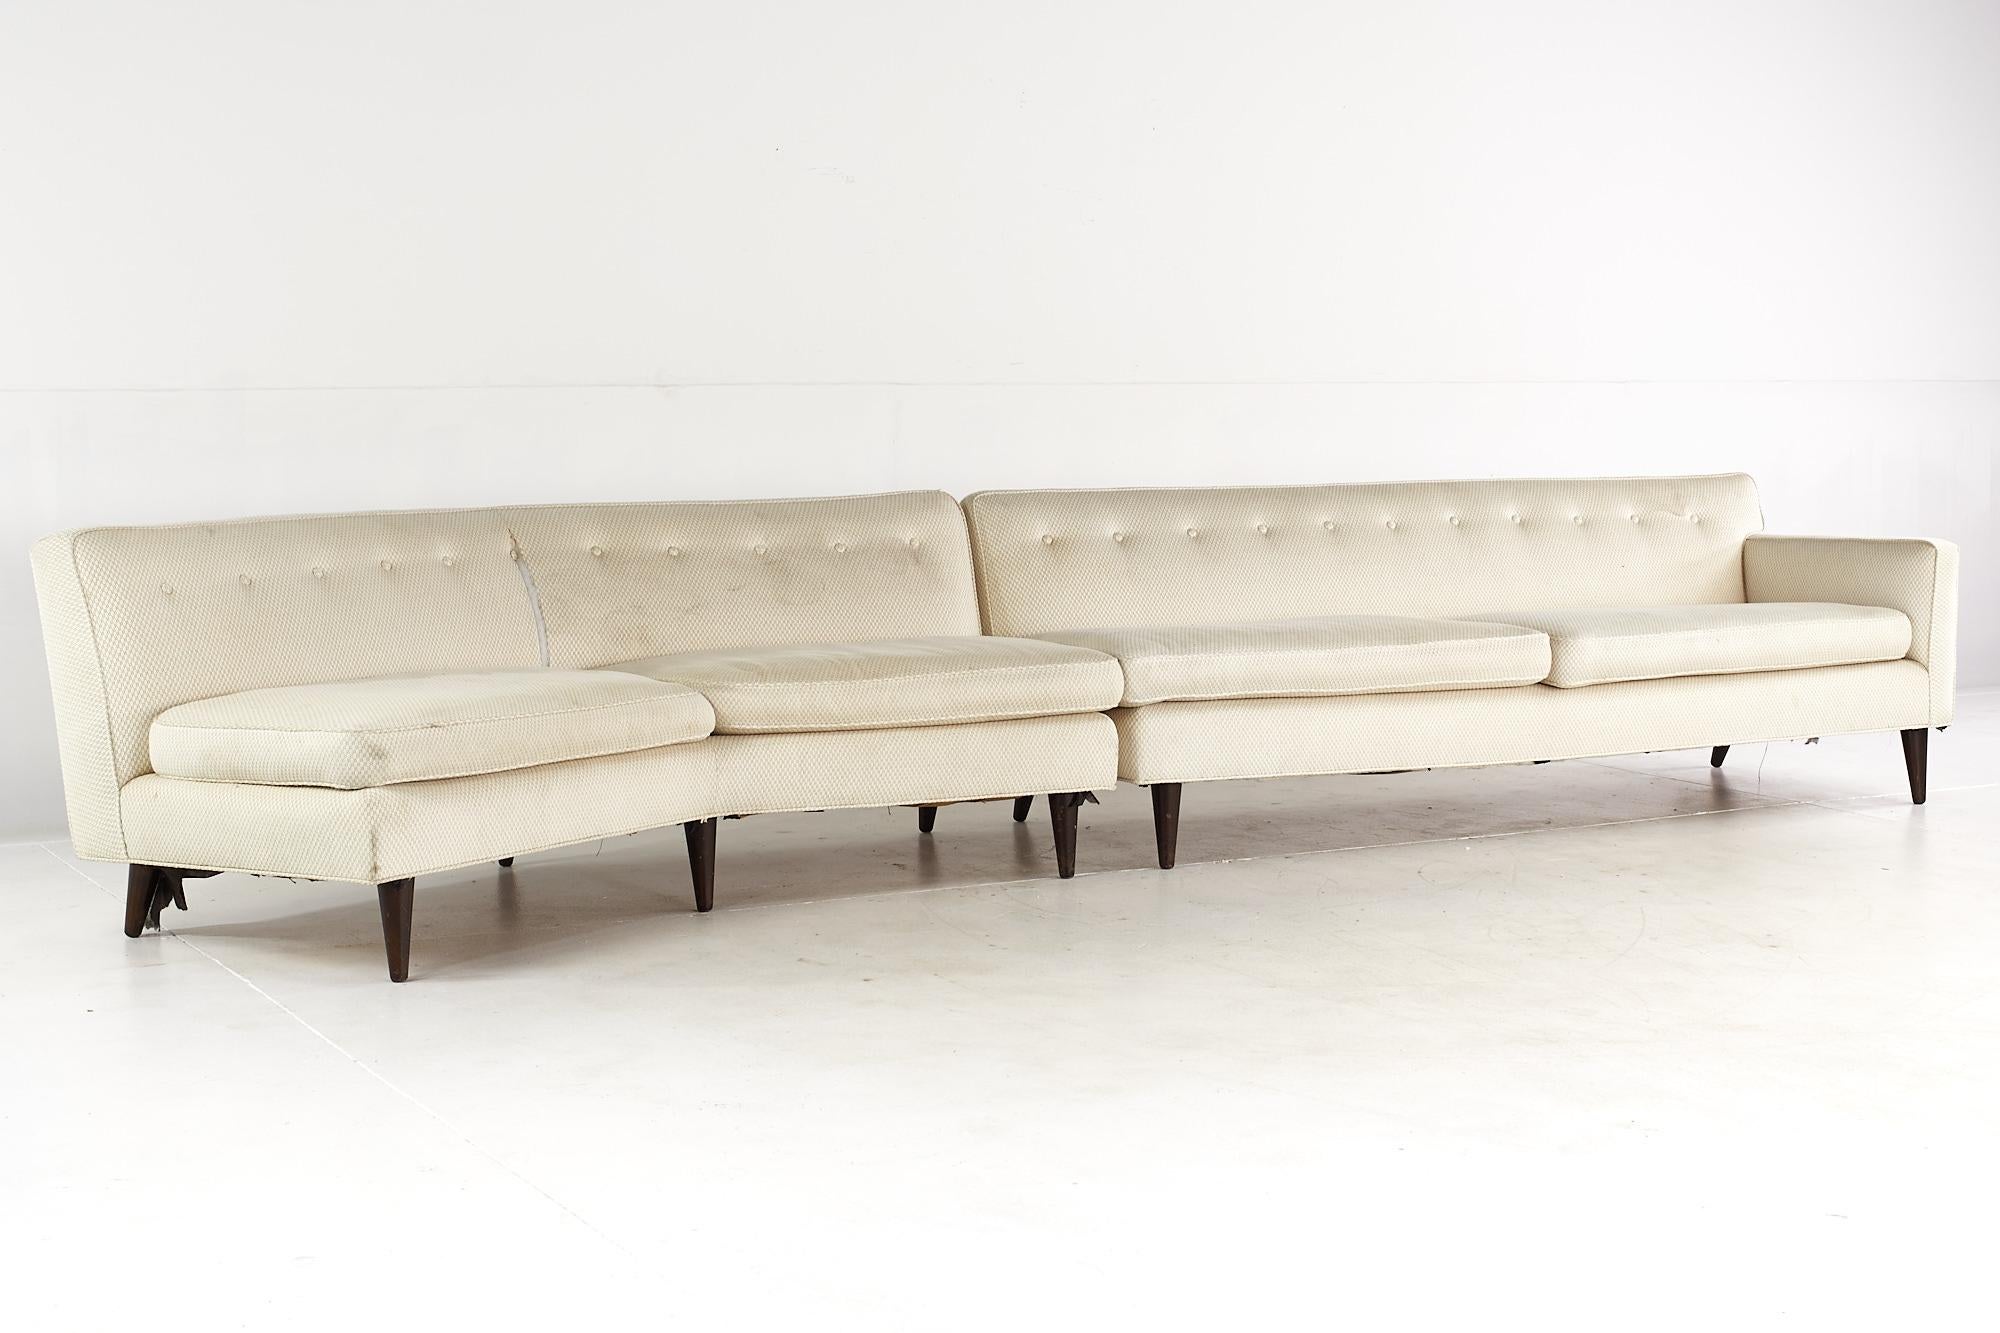 Edward Wormley for Dunbar midcentury sectional sofa

This sofa measures: 165 wide x 29 deep x 28.5 inches high, with a seat height of 18 and arm height of 24 inches

All pieces of furniture can be had in what we call restored vintage condition.